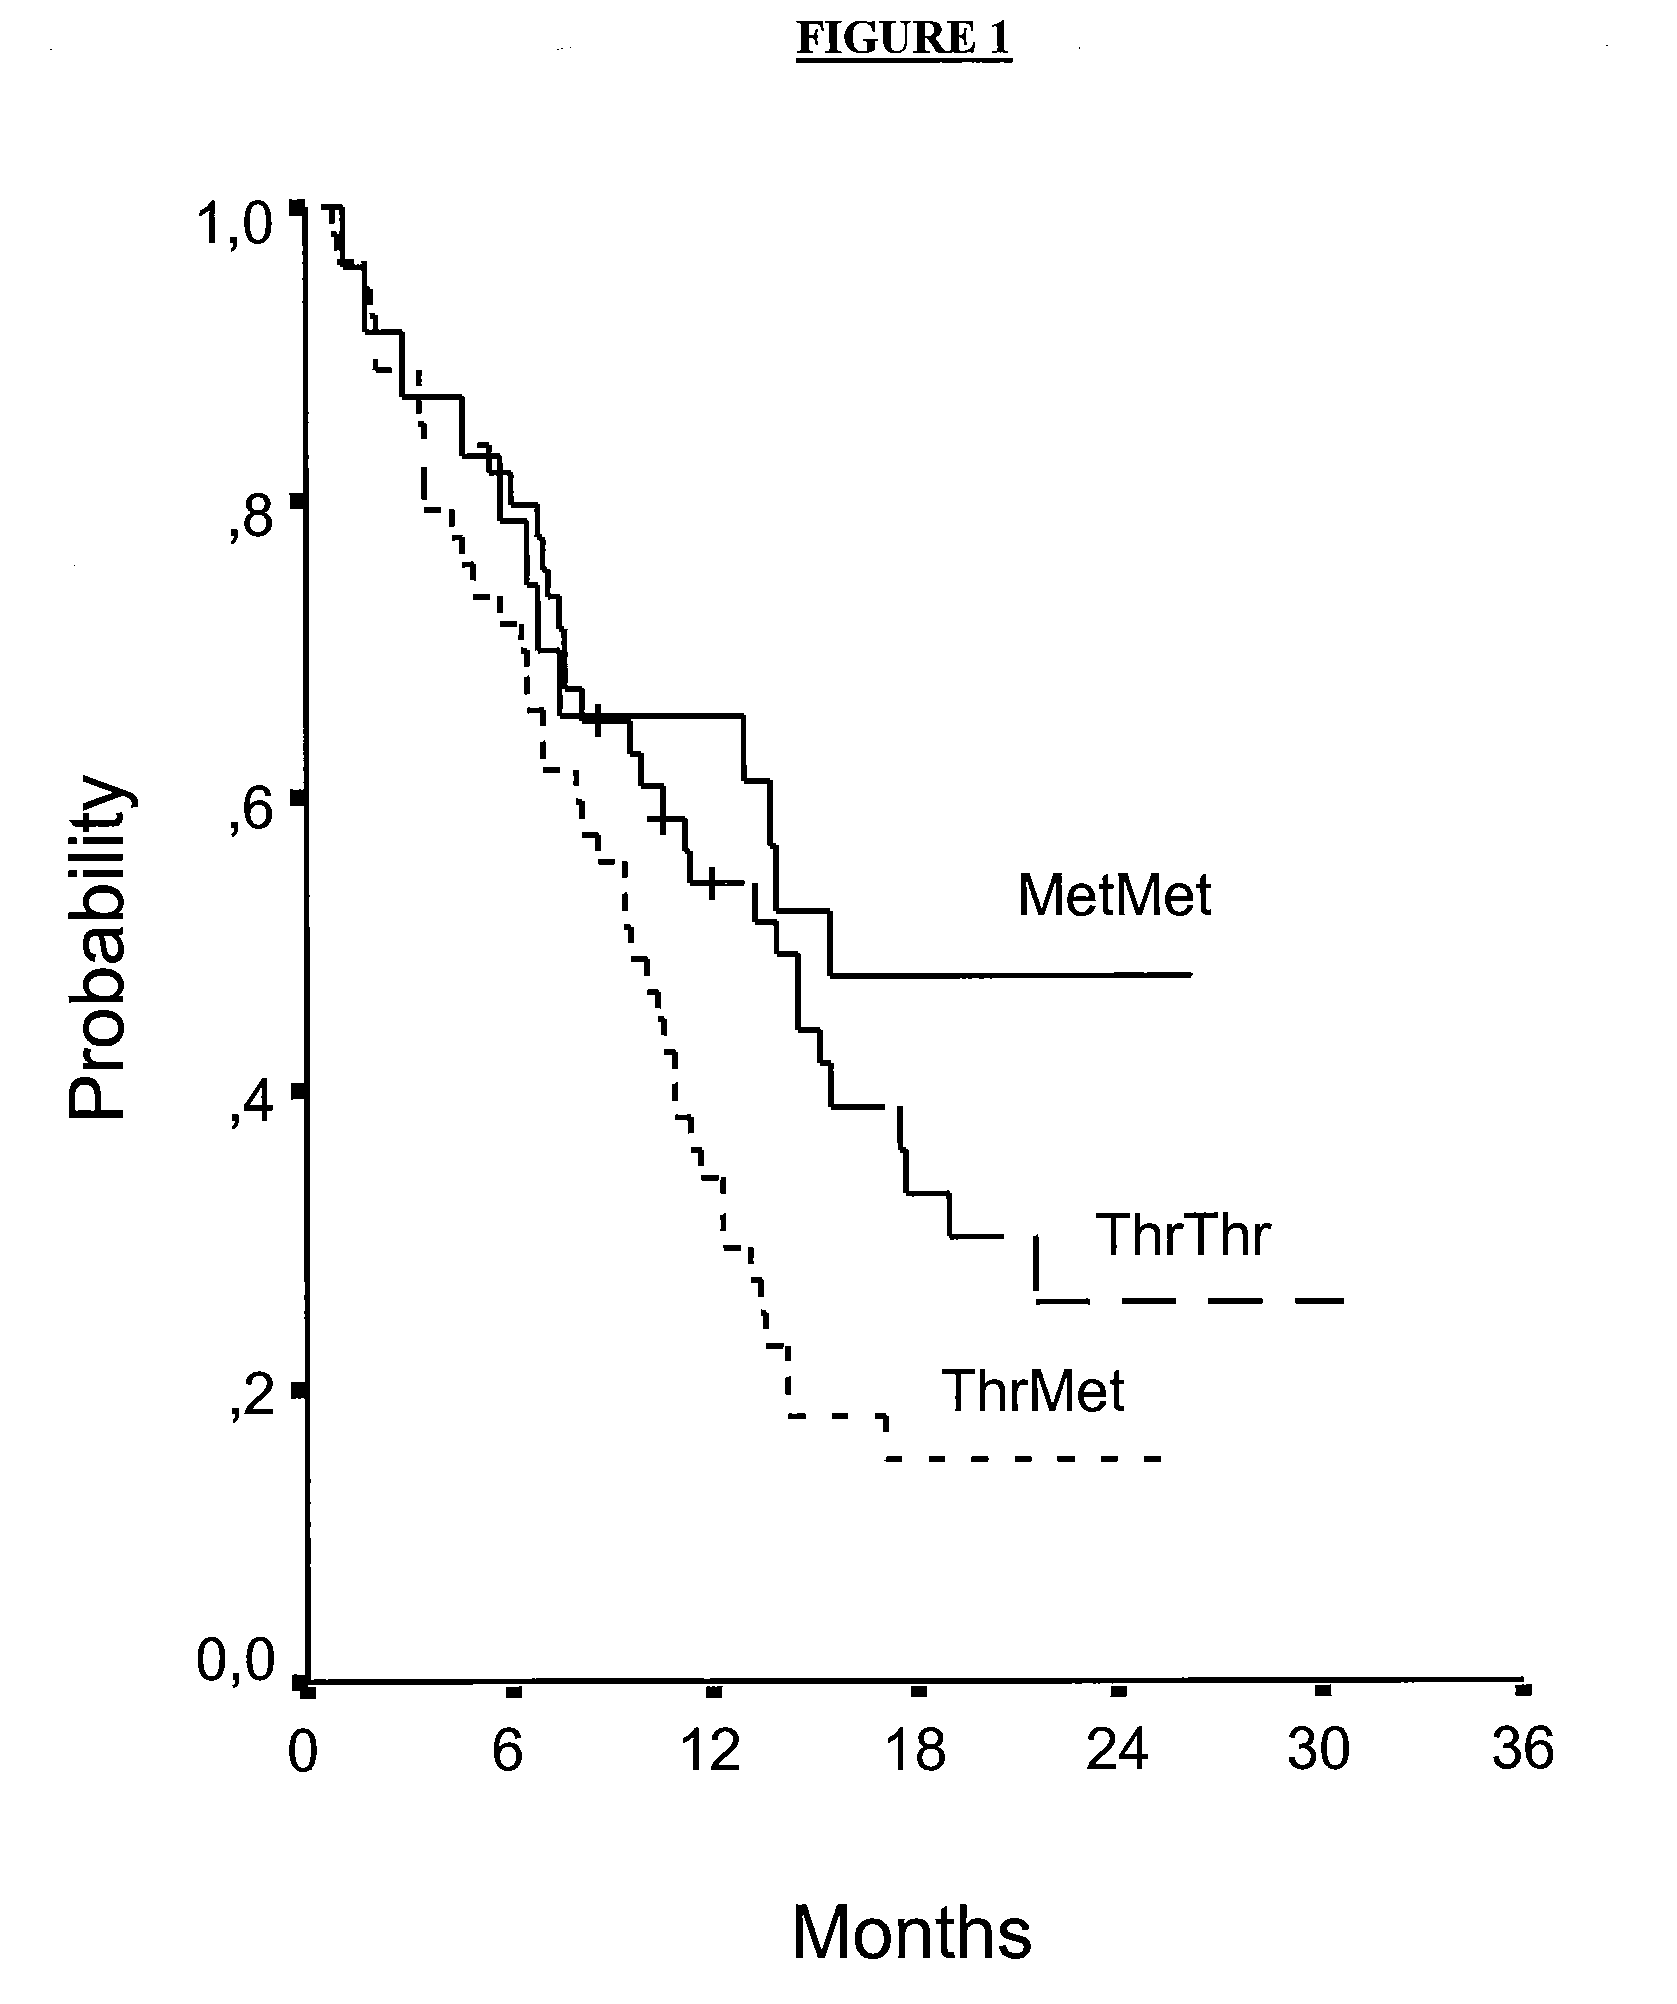 Method of determining outcome of non small-cell lung cancer according to xrcc3 polymorphism